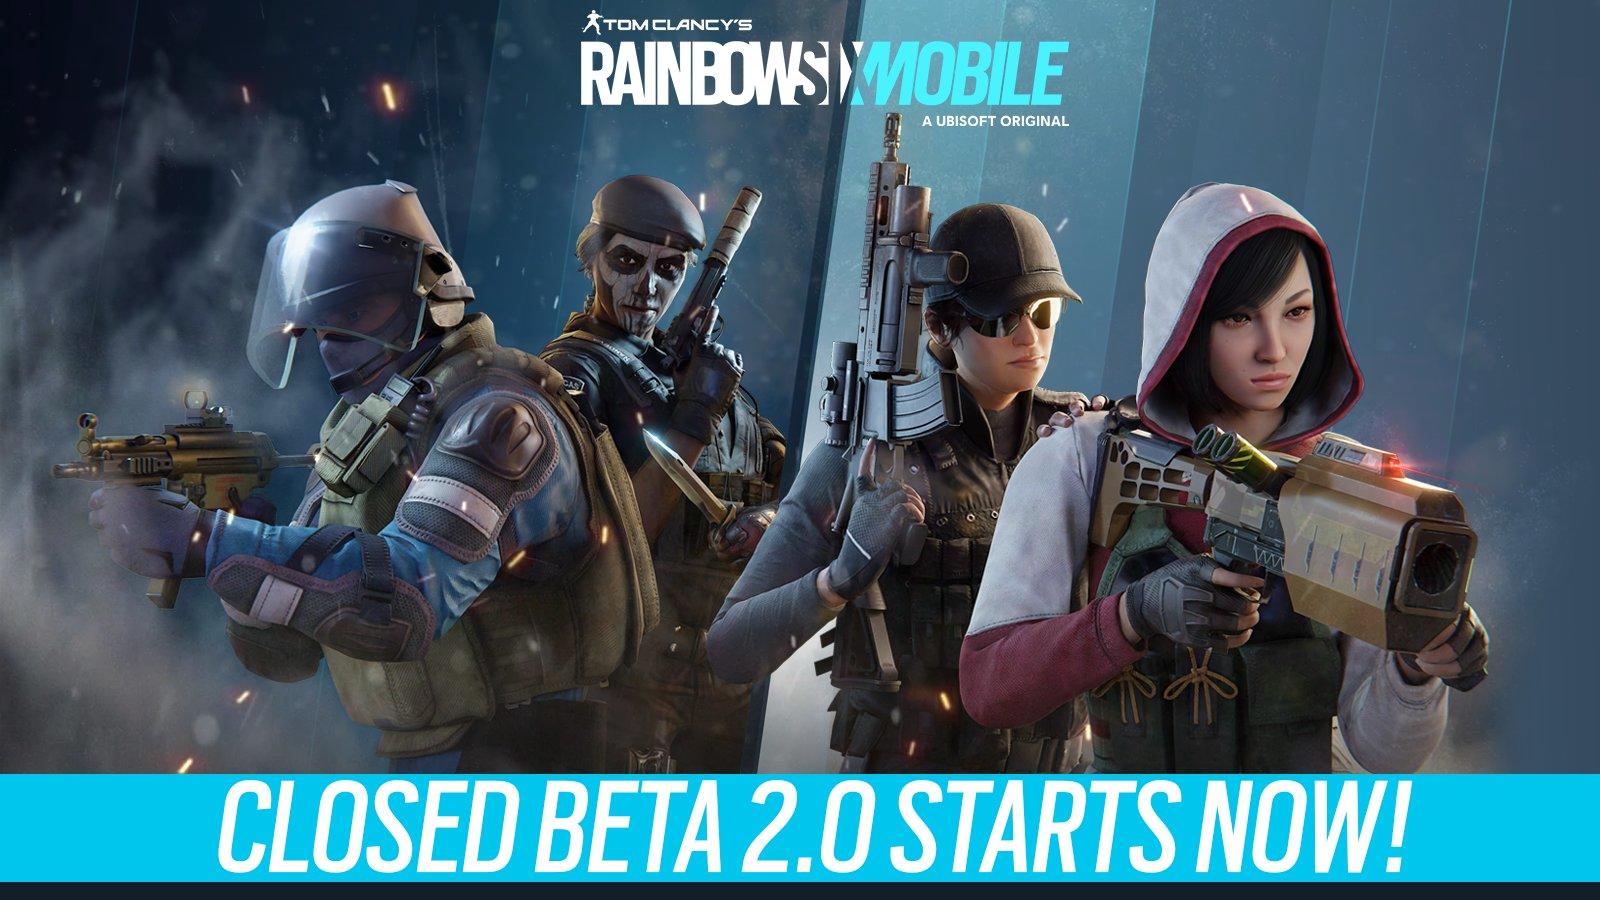 Ubisoft announces Rainbow Six Mobile with first gameplay video